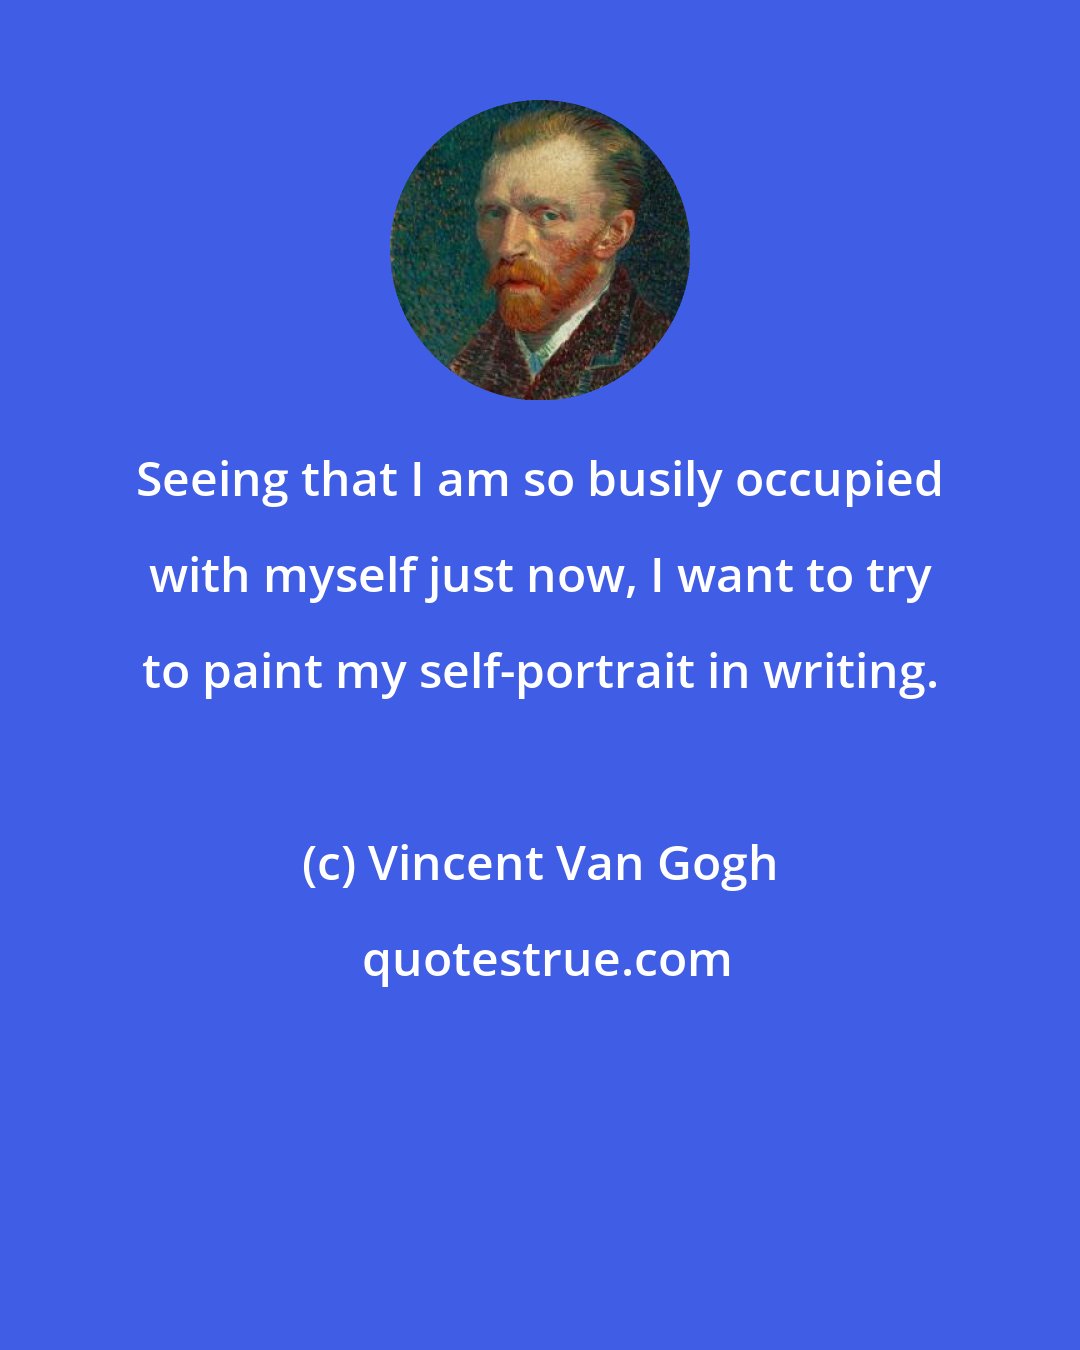 Vincent Van Gogh: Seeing that I am so busily occupied with myself just now, I want to try to paint my self-portrait in writing.